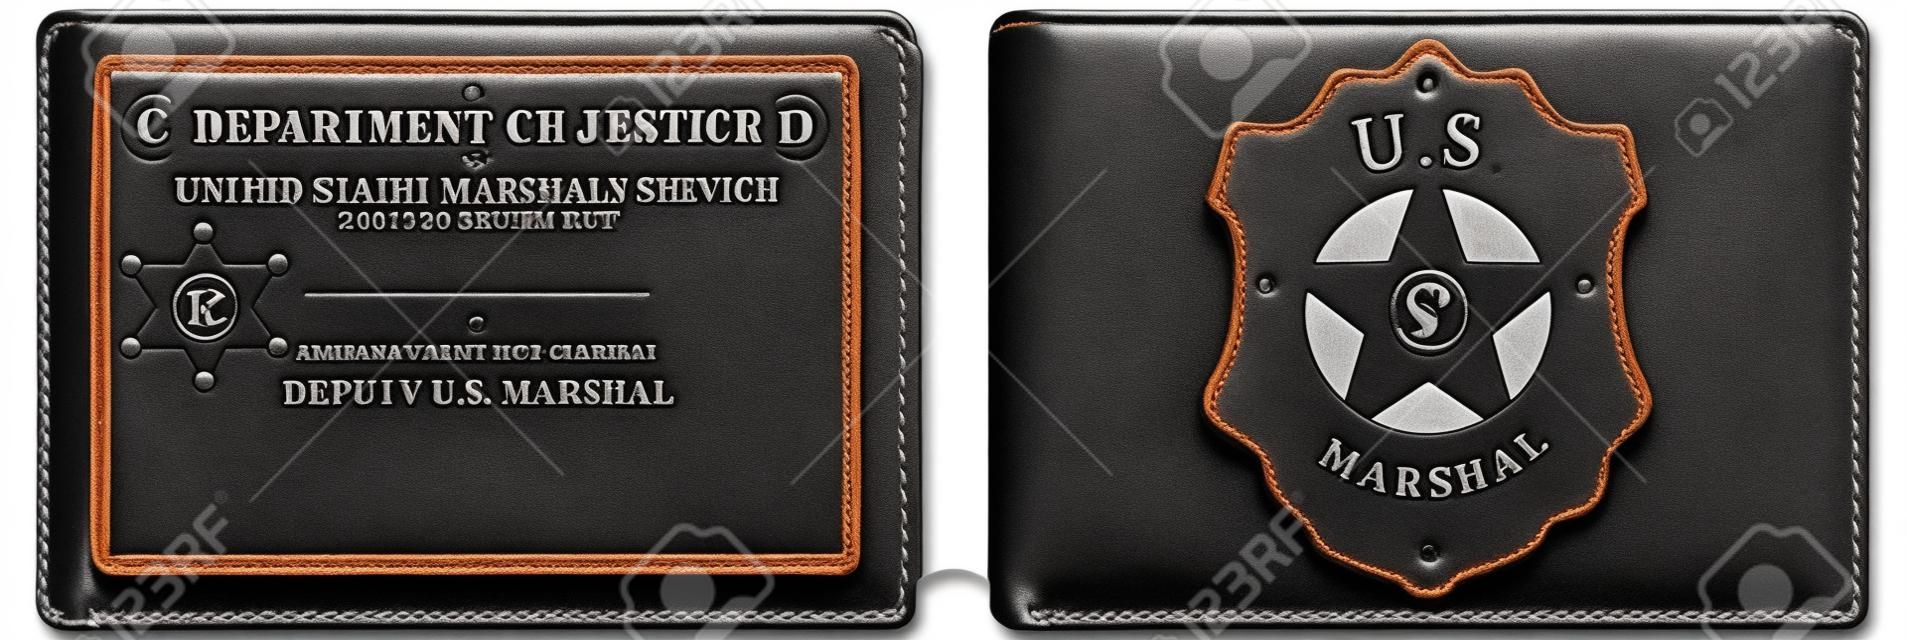 The identity card US Marshal with a metal sign in a leather wallet.